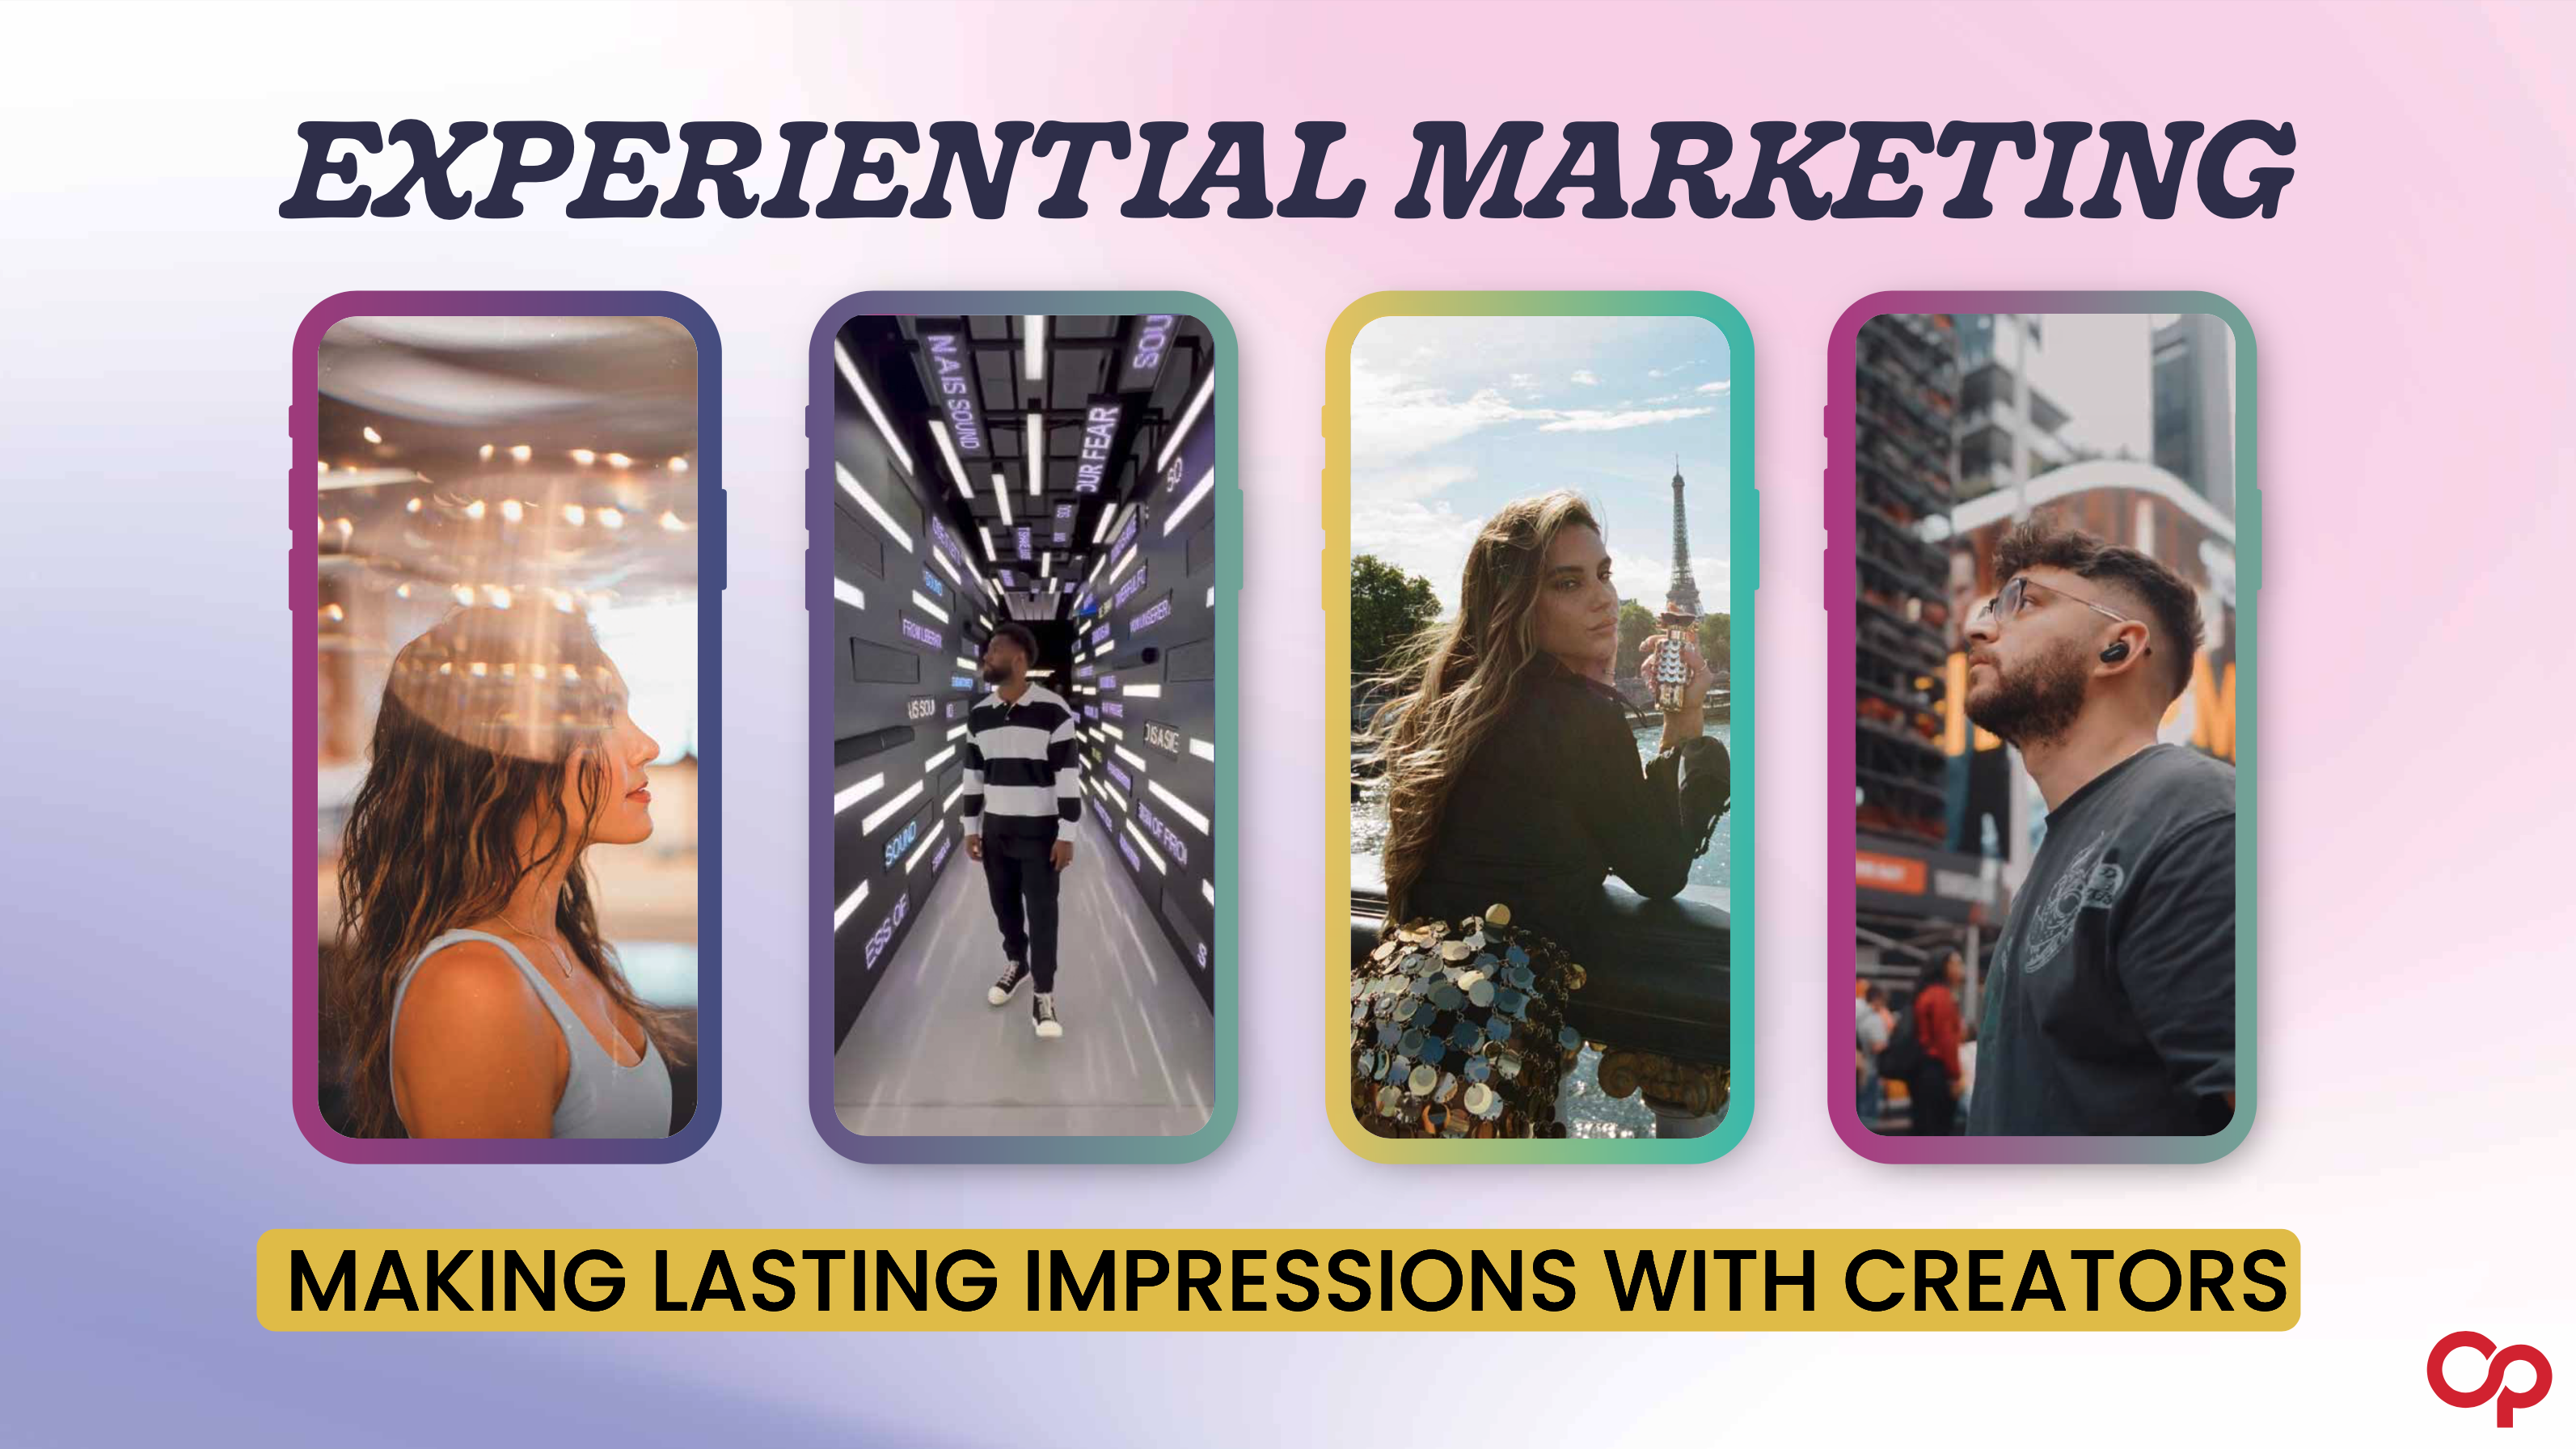 [REPORT] Experiential Marketing with Creators